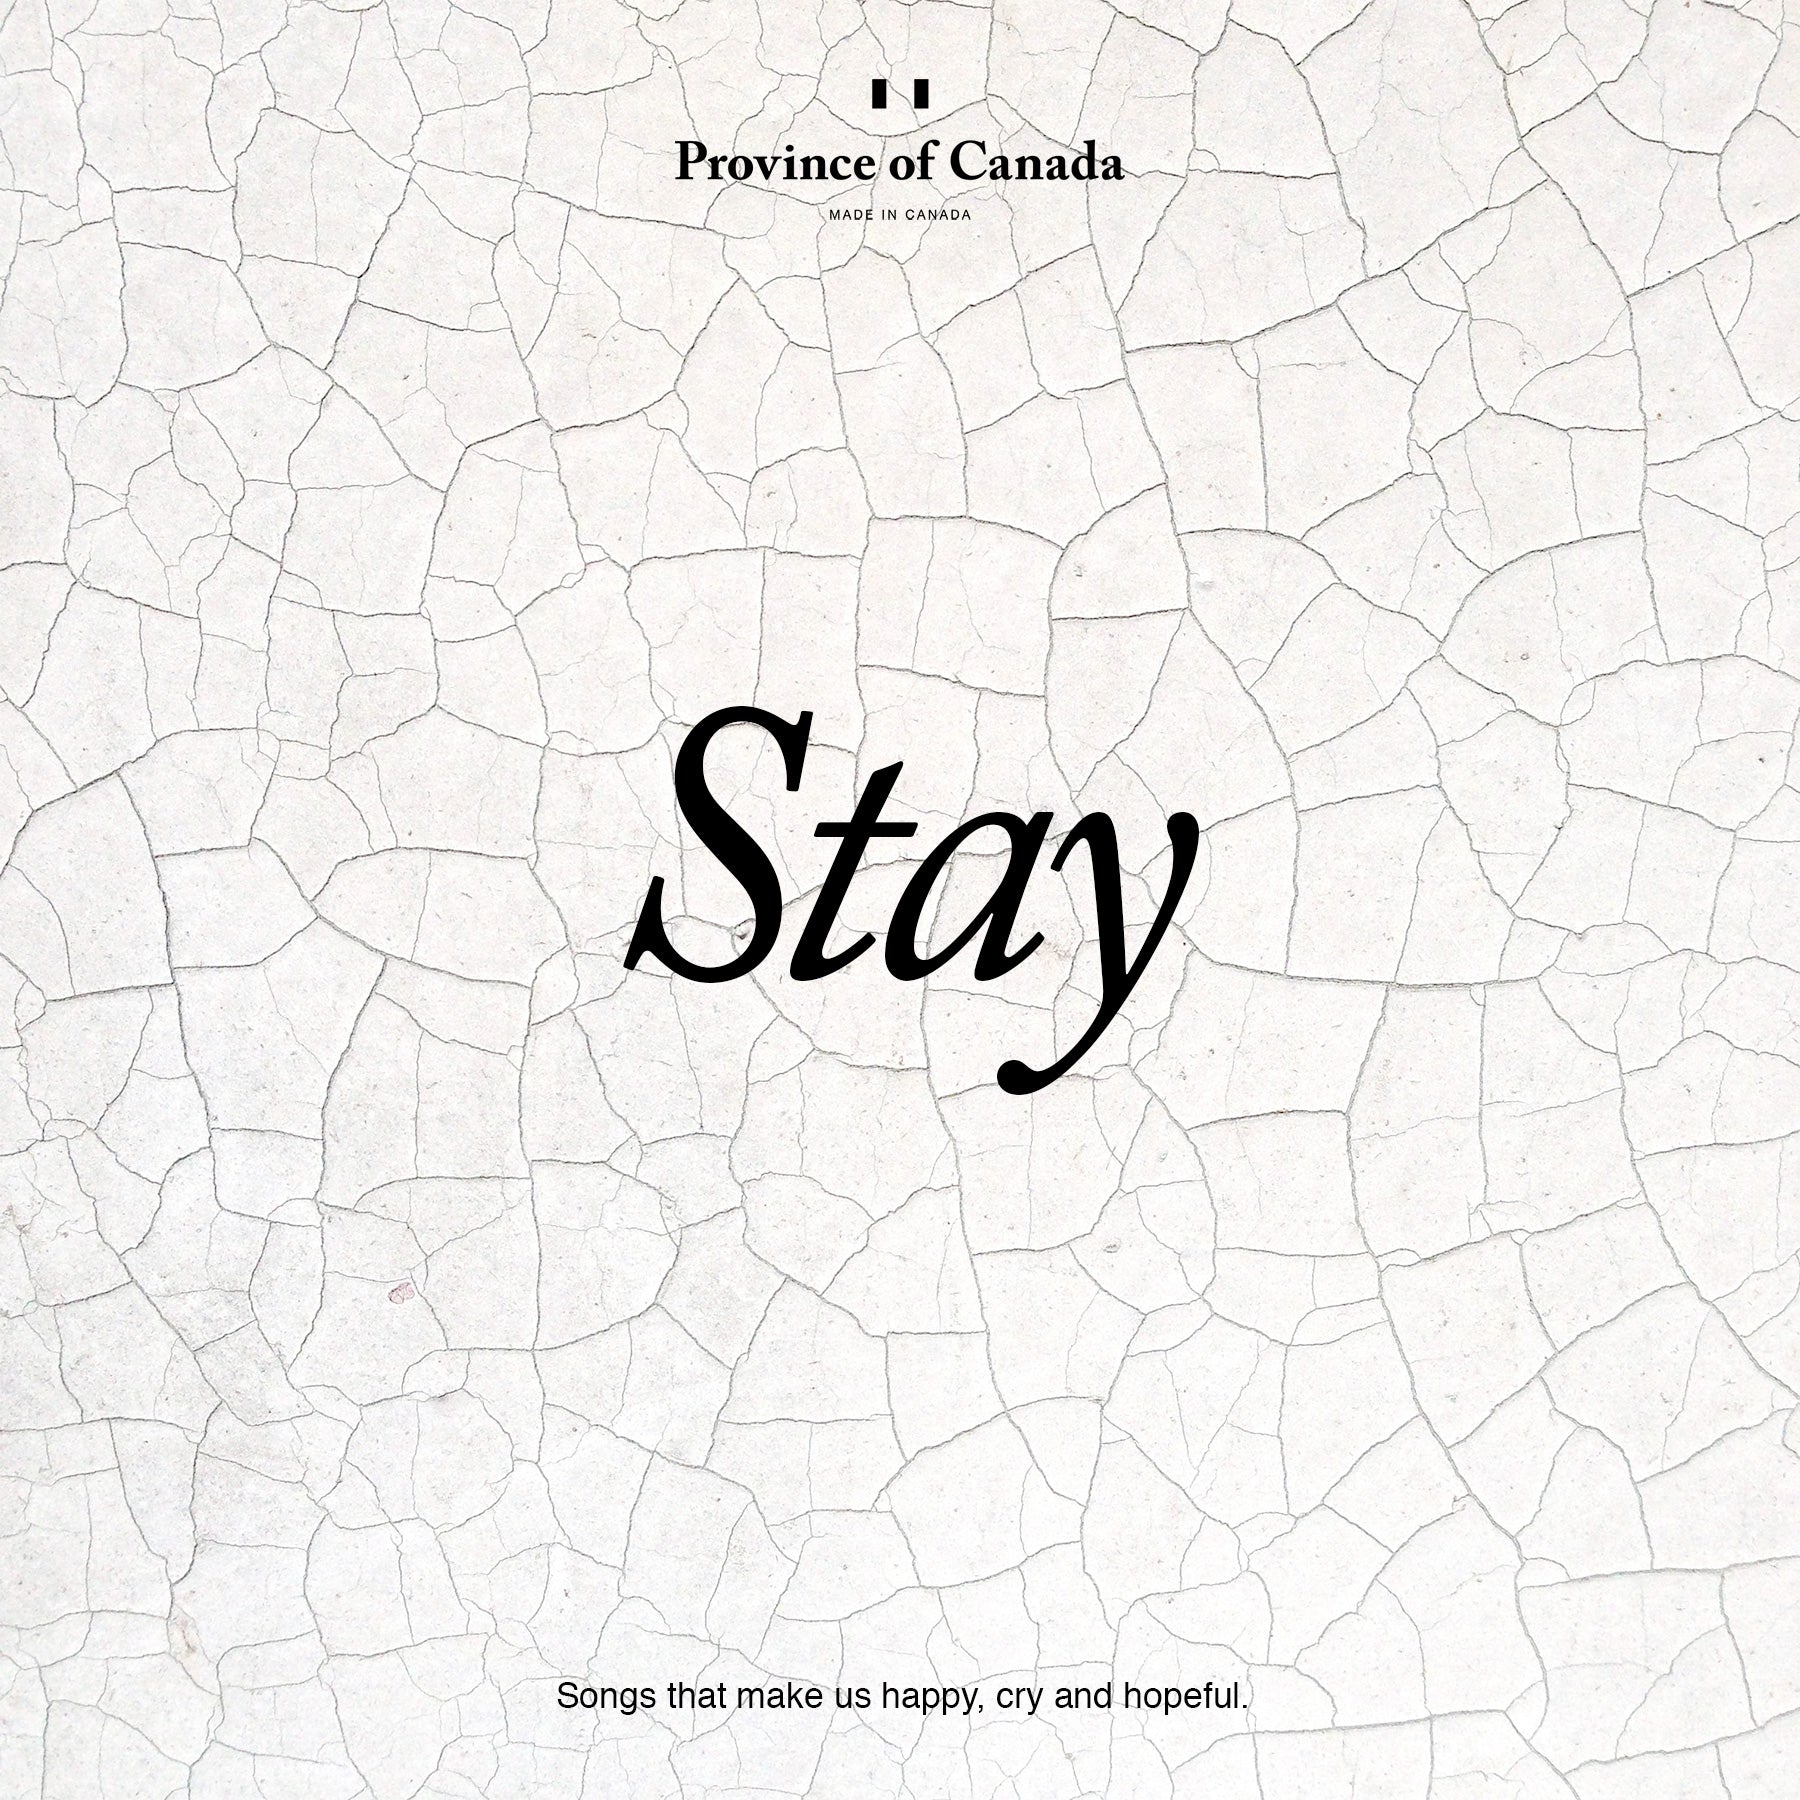 Province of Canada - Playlist Stay